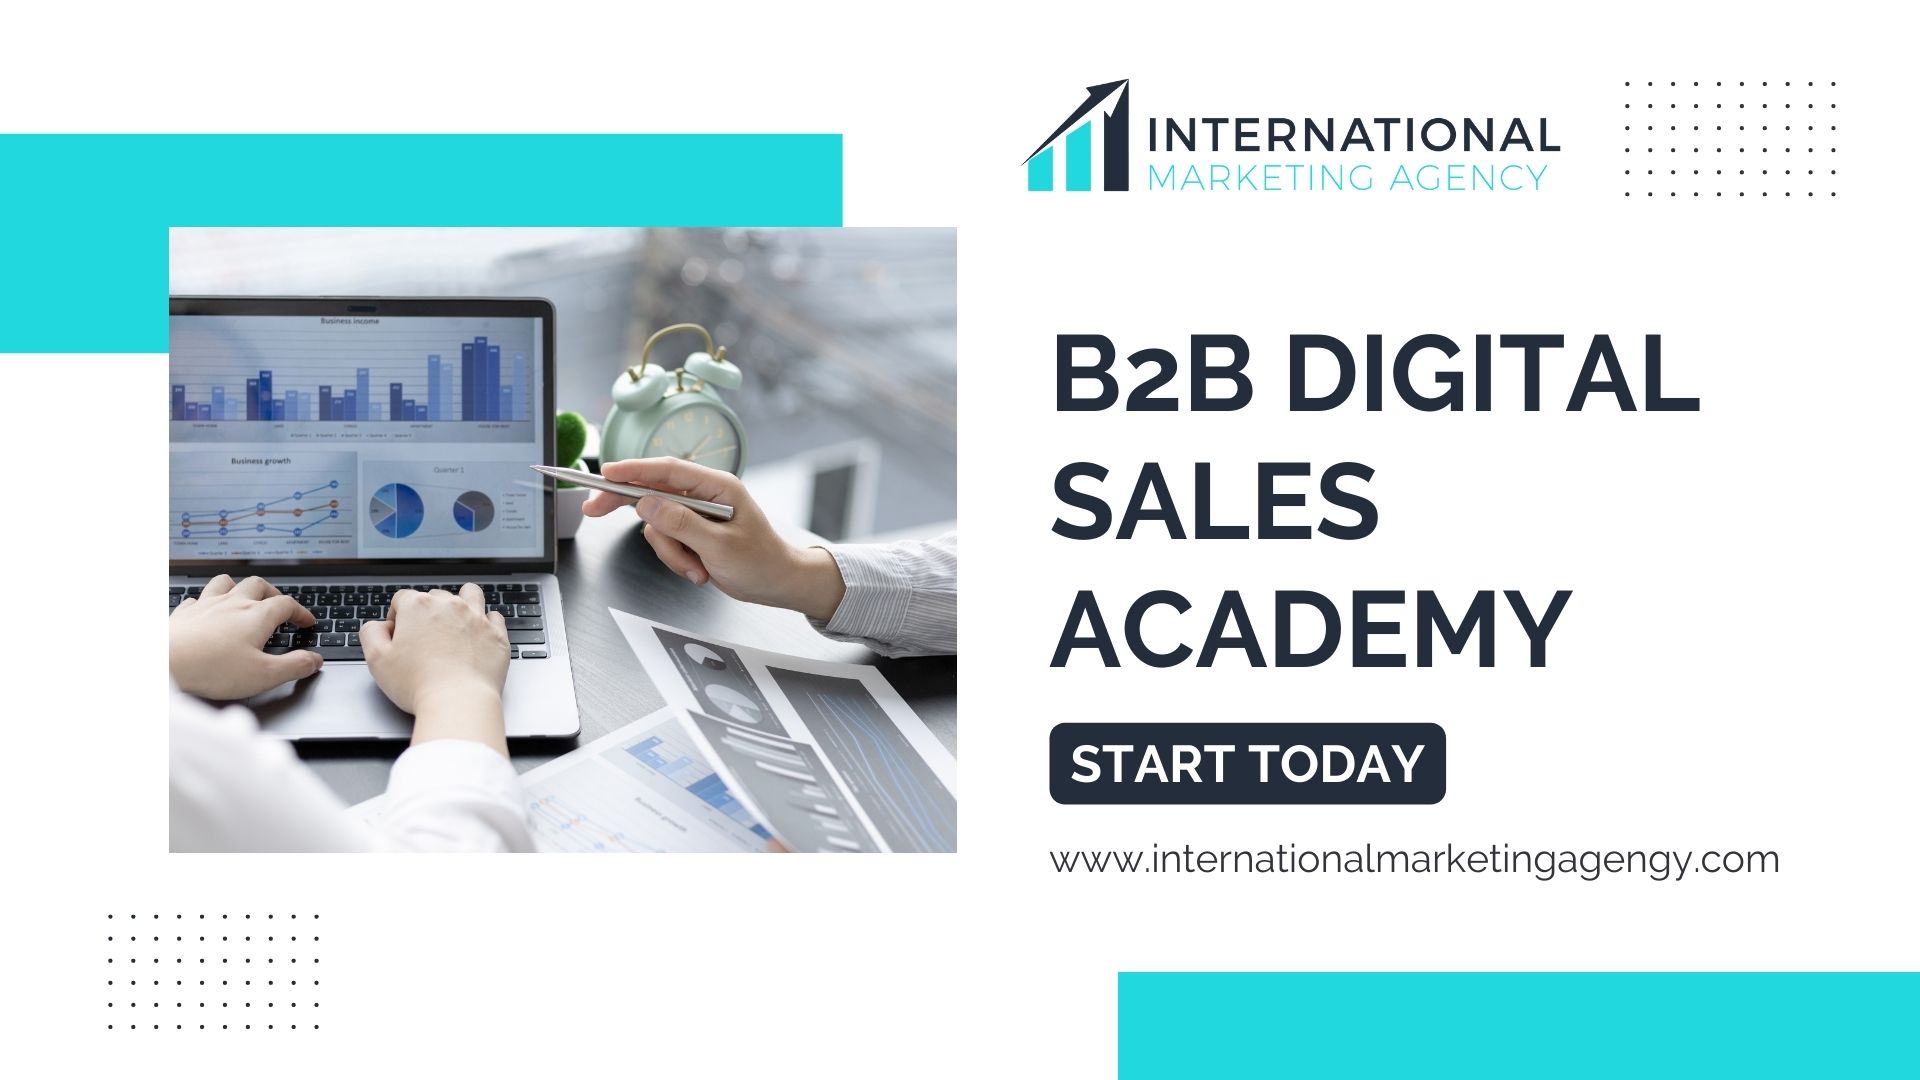 Join the first B2B Digital Sales Academy to prepare for the future of digital sales